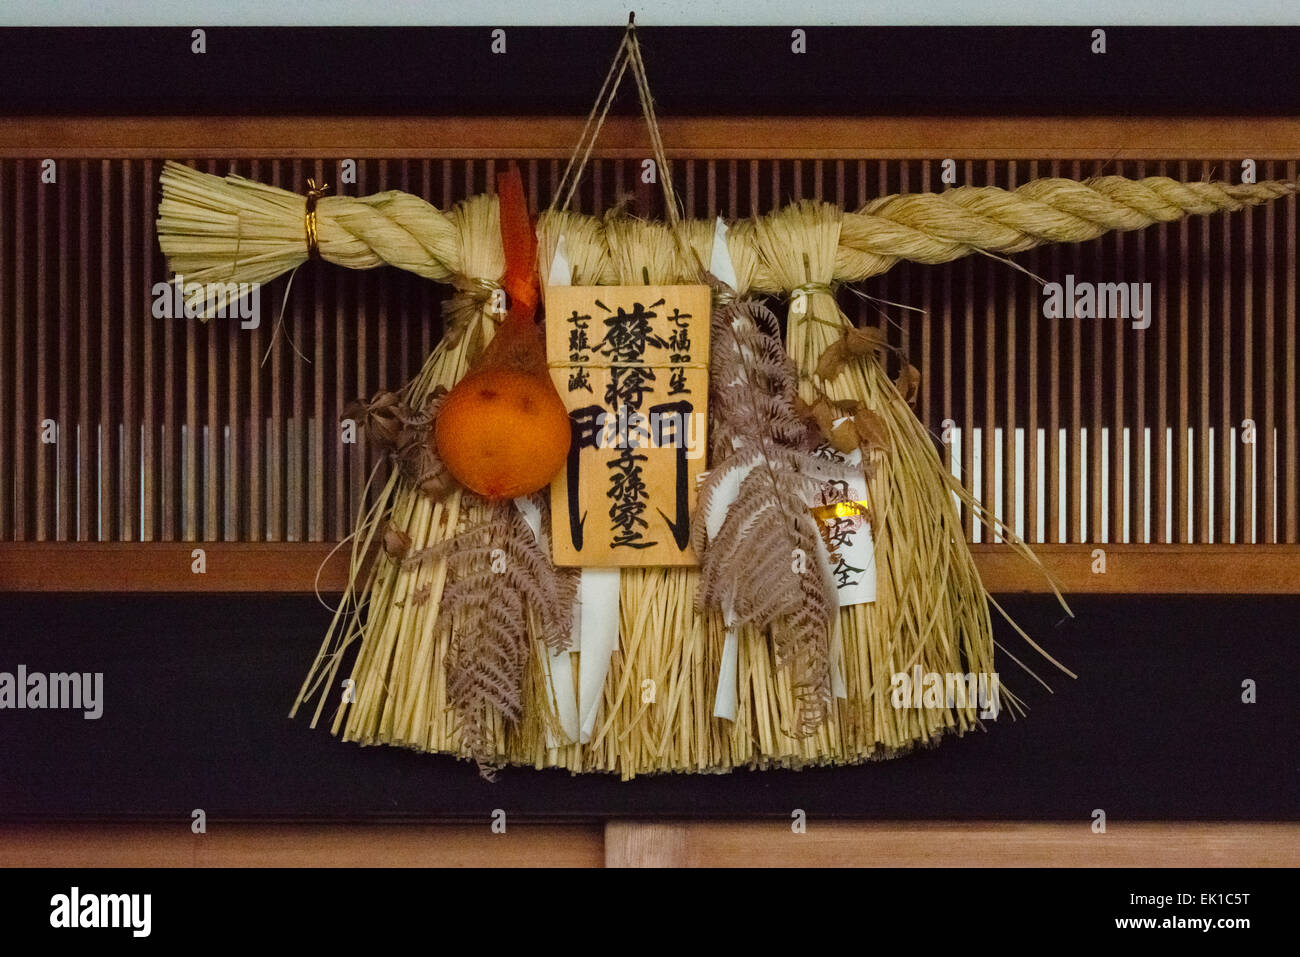 Straw coat driving away evil spirits on the traditional house, Gujo Hachiman, Gifu Prefecture, Japan Stock Photo